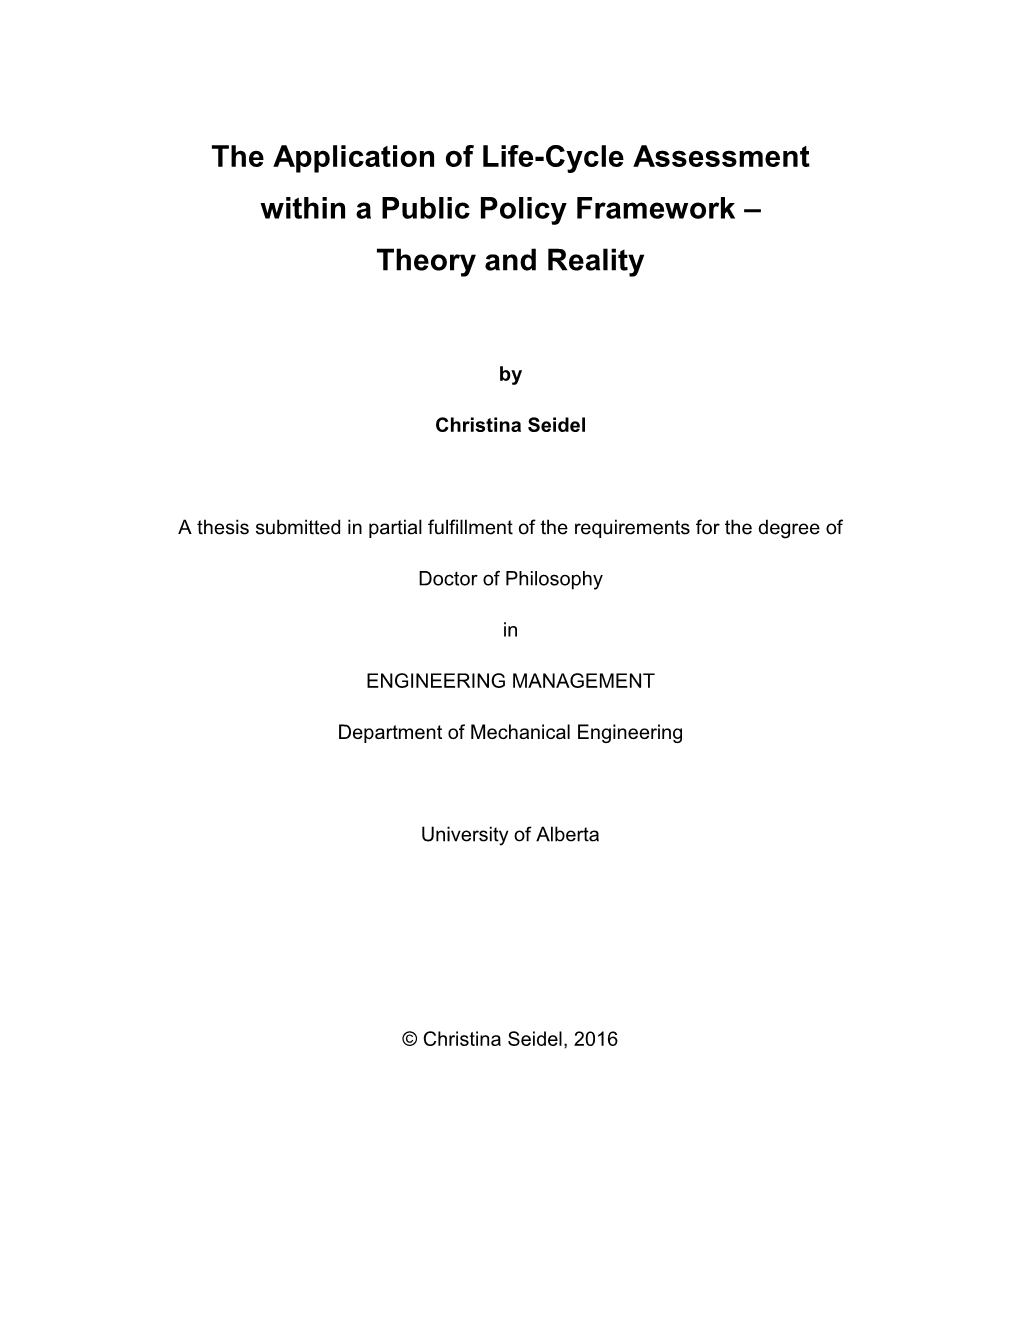 The Application of Life-Cycle Assessment Within a Public Policy Framework – Theory and Reality